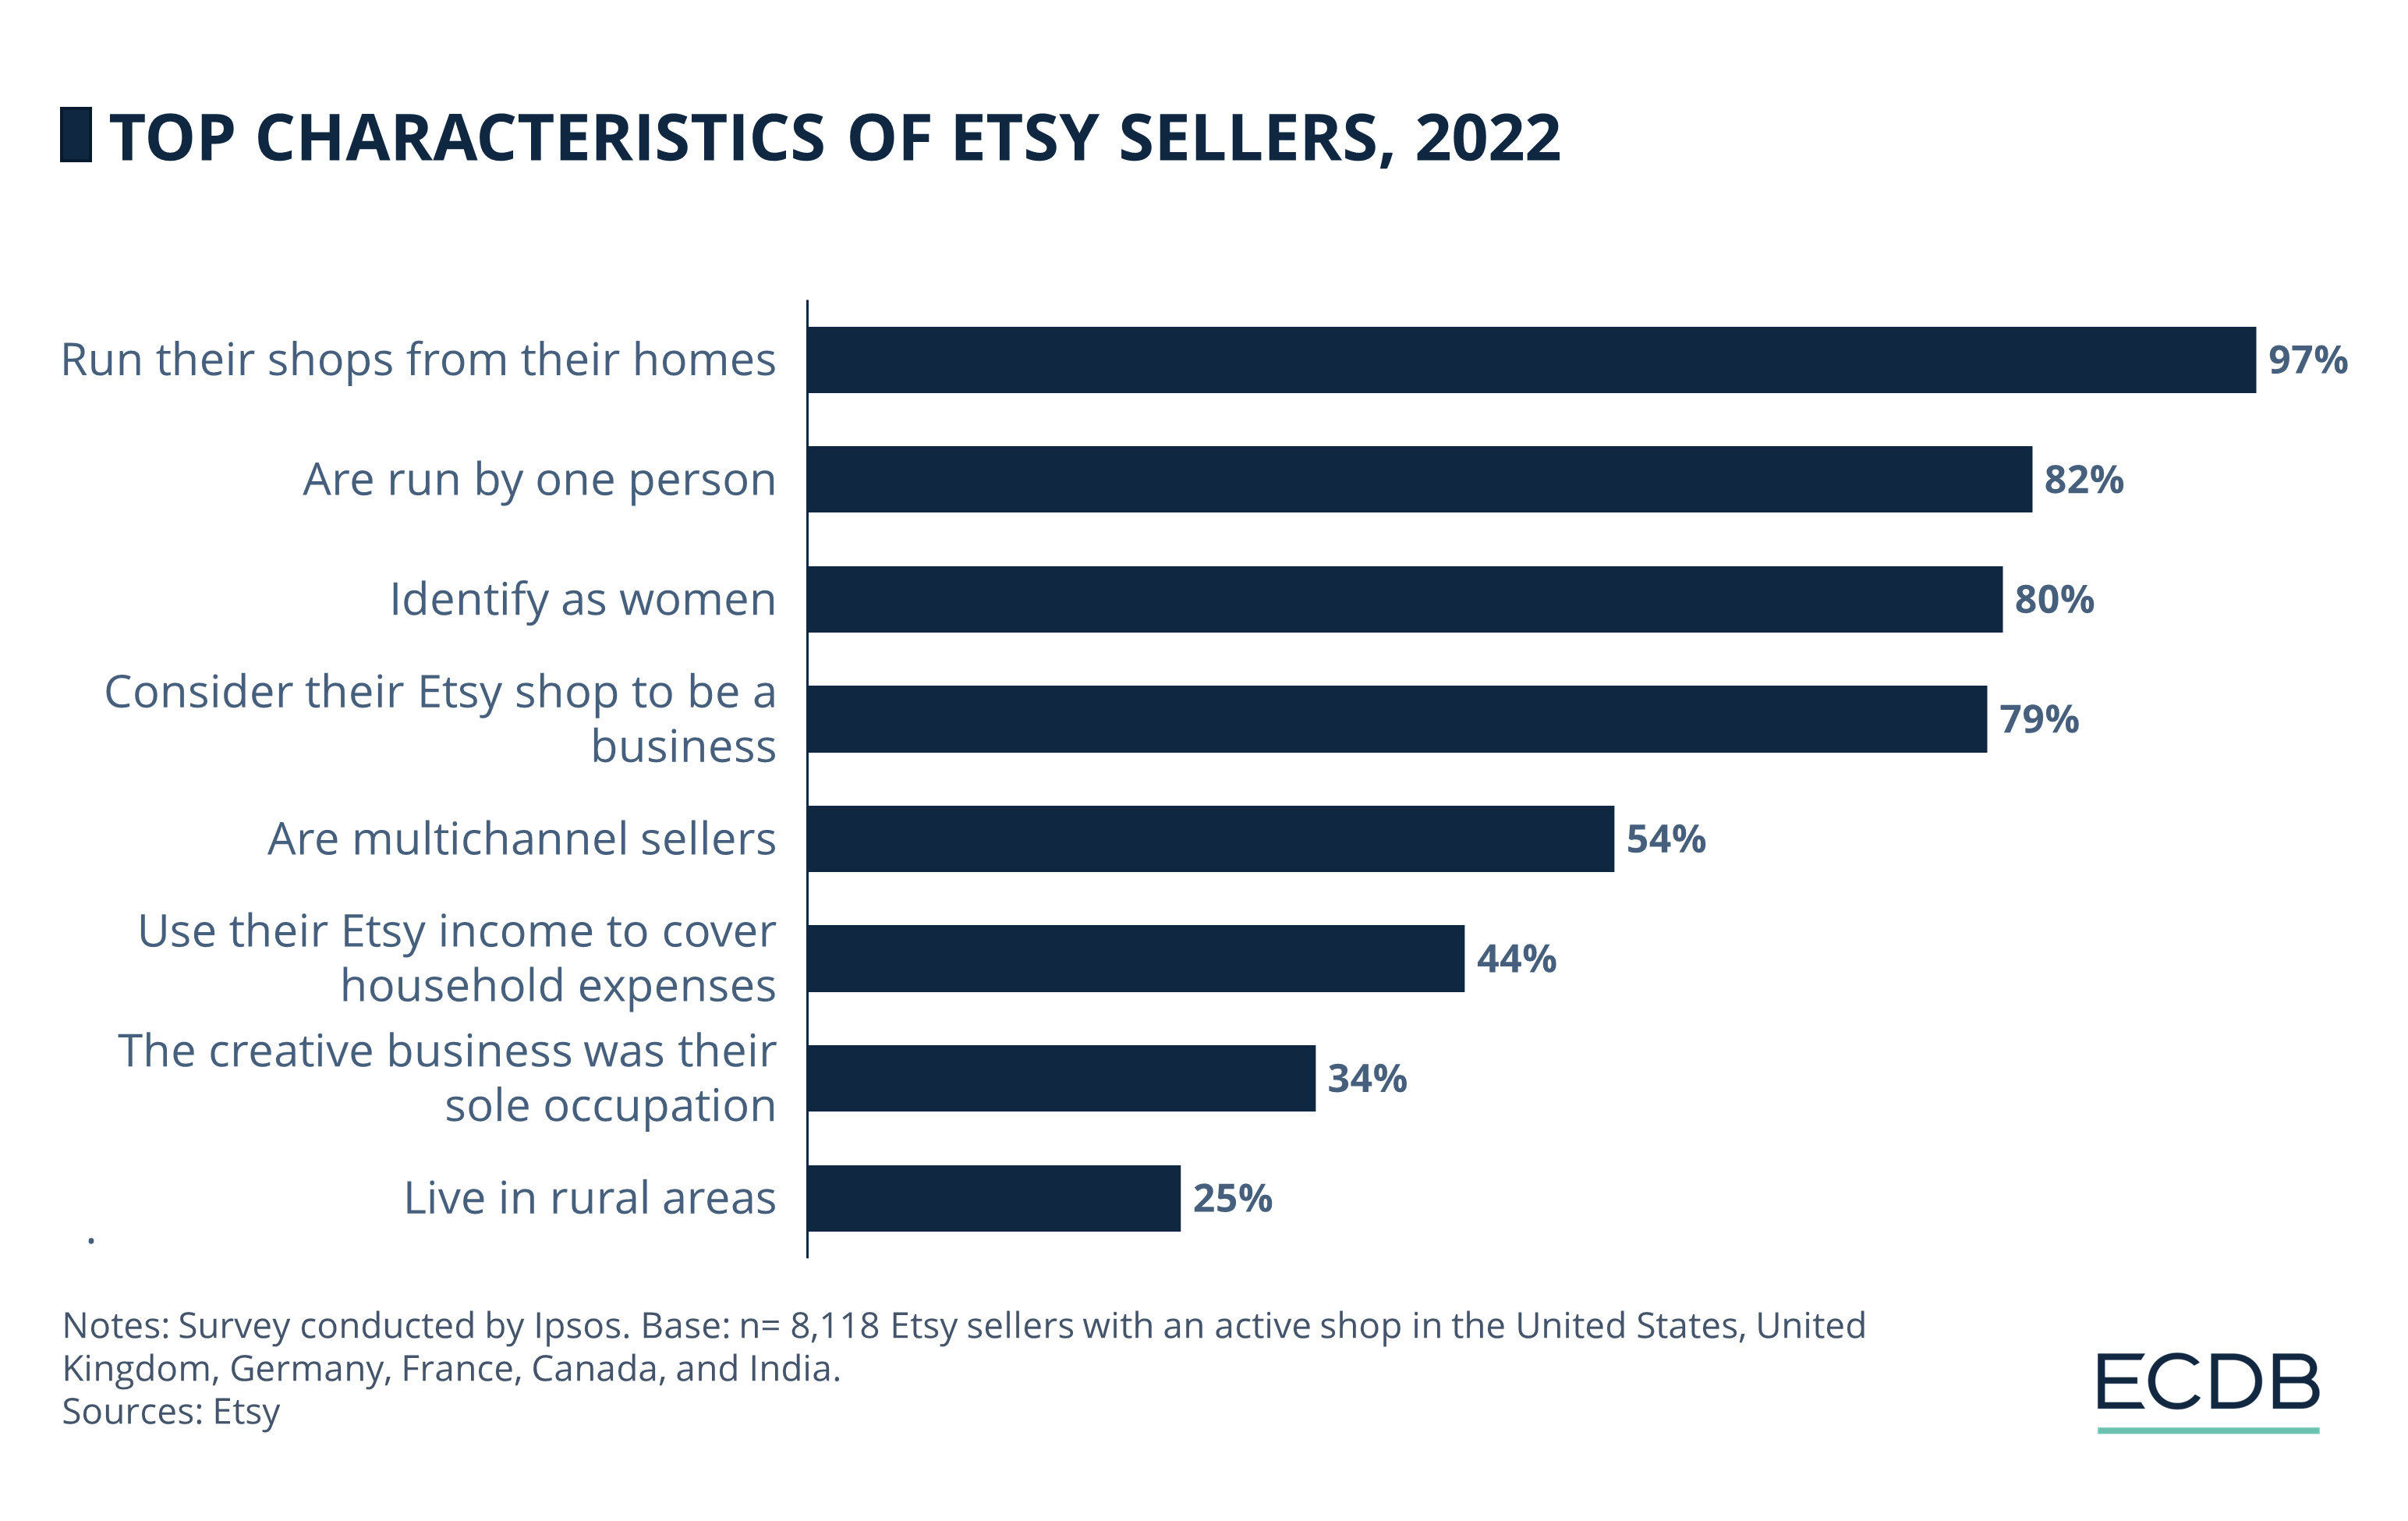 Top Characteristics of Etsy Sellers, 2022